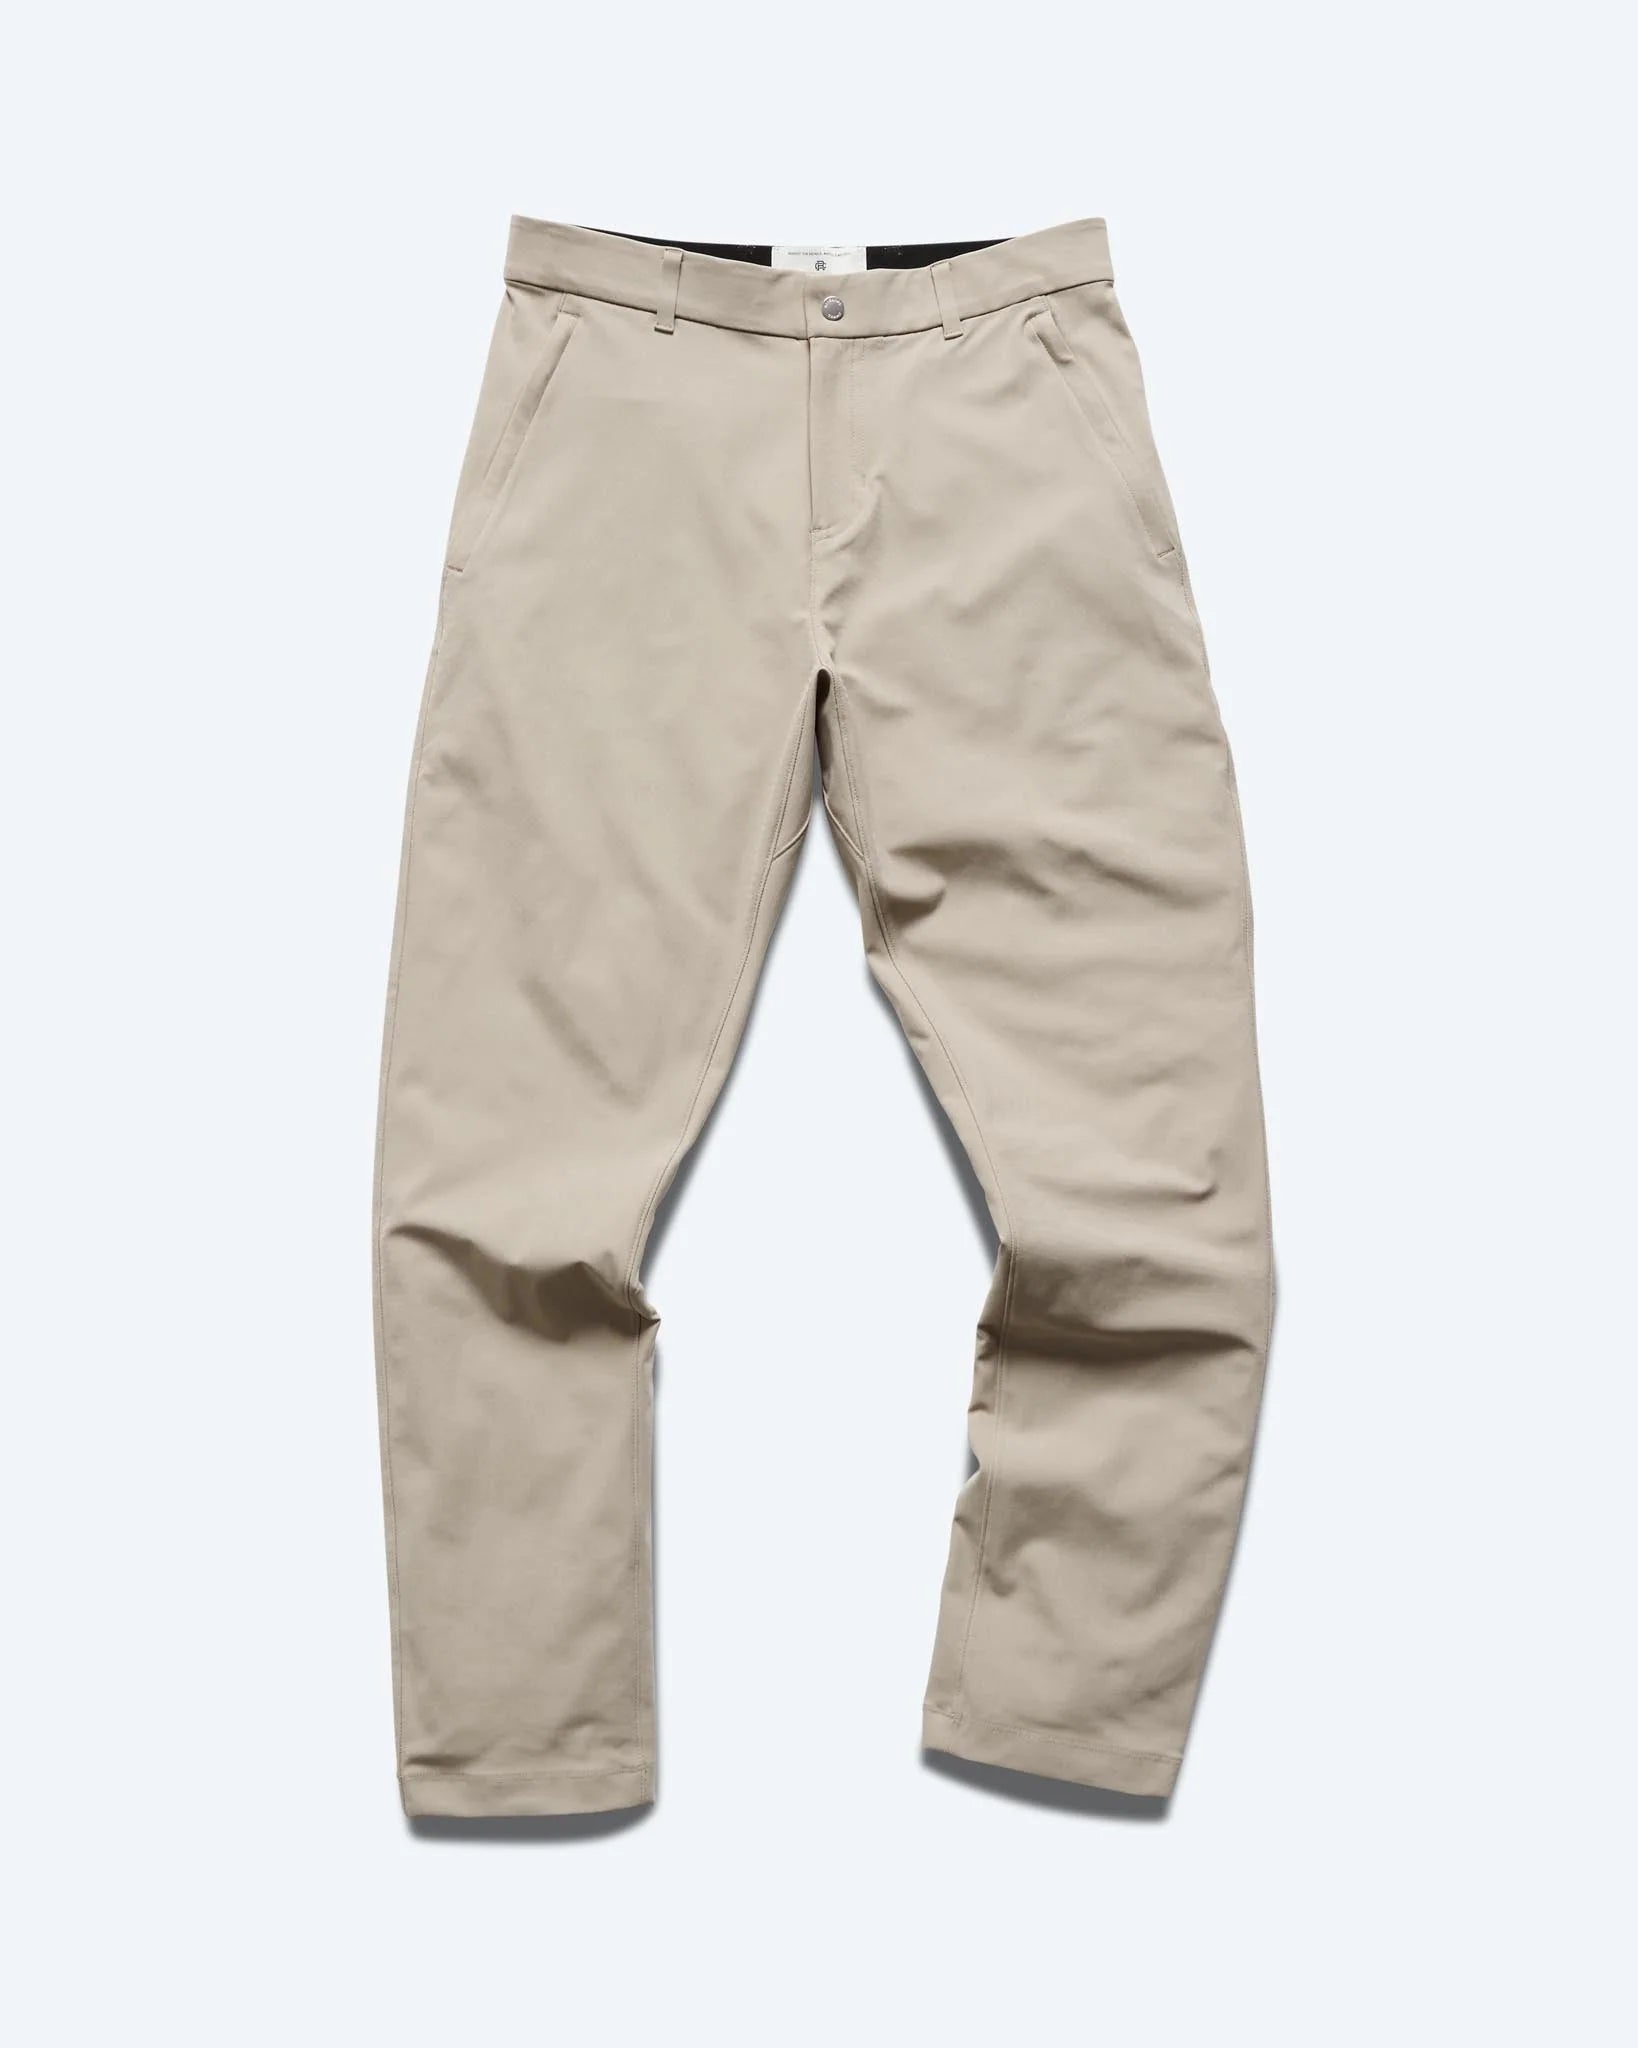 Reigning Champ Stretch Warp Knit Coach's Pant in Desert